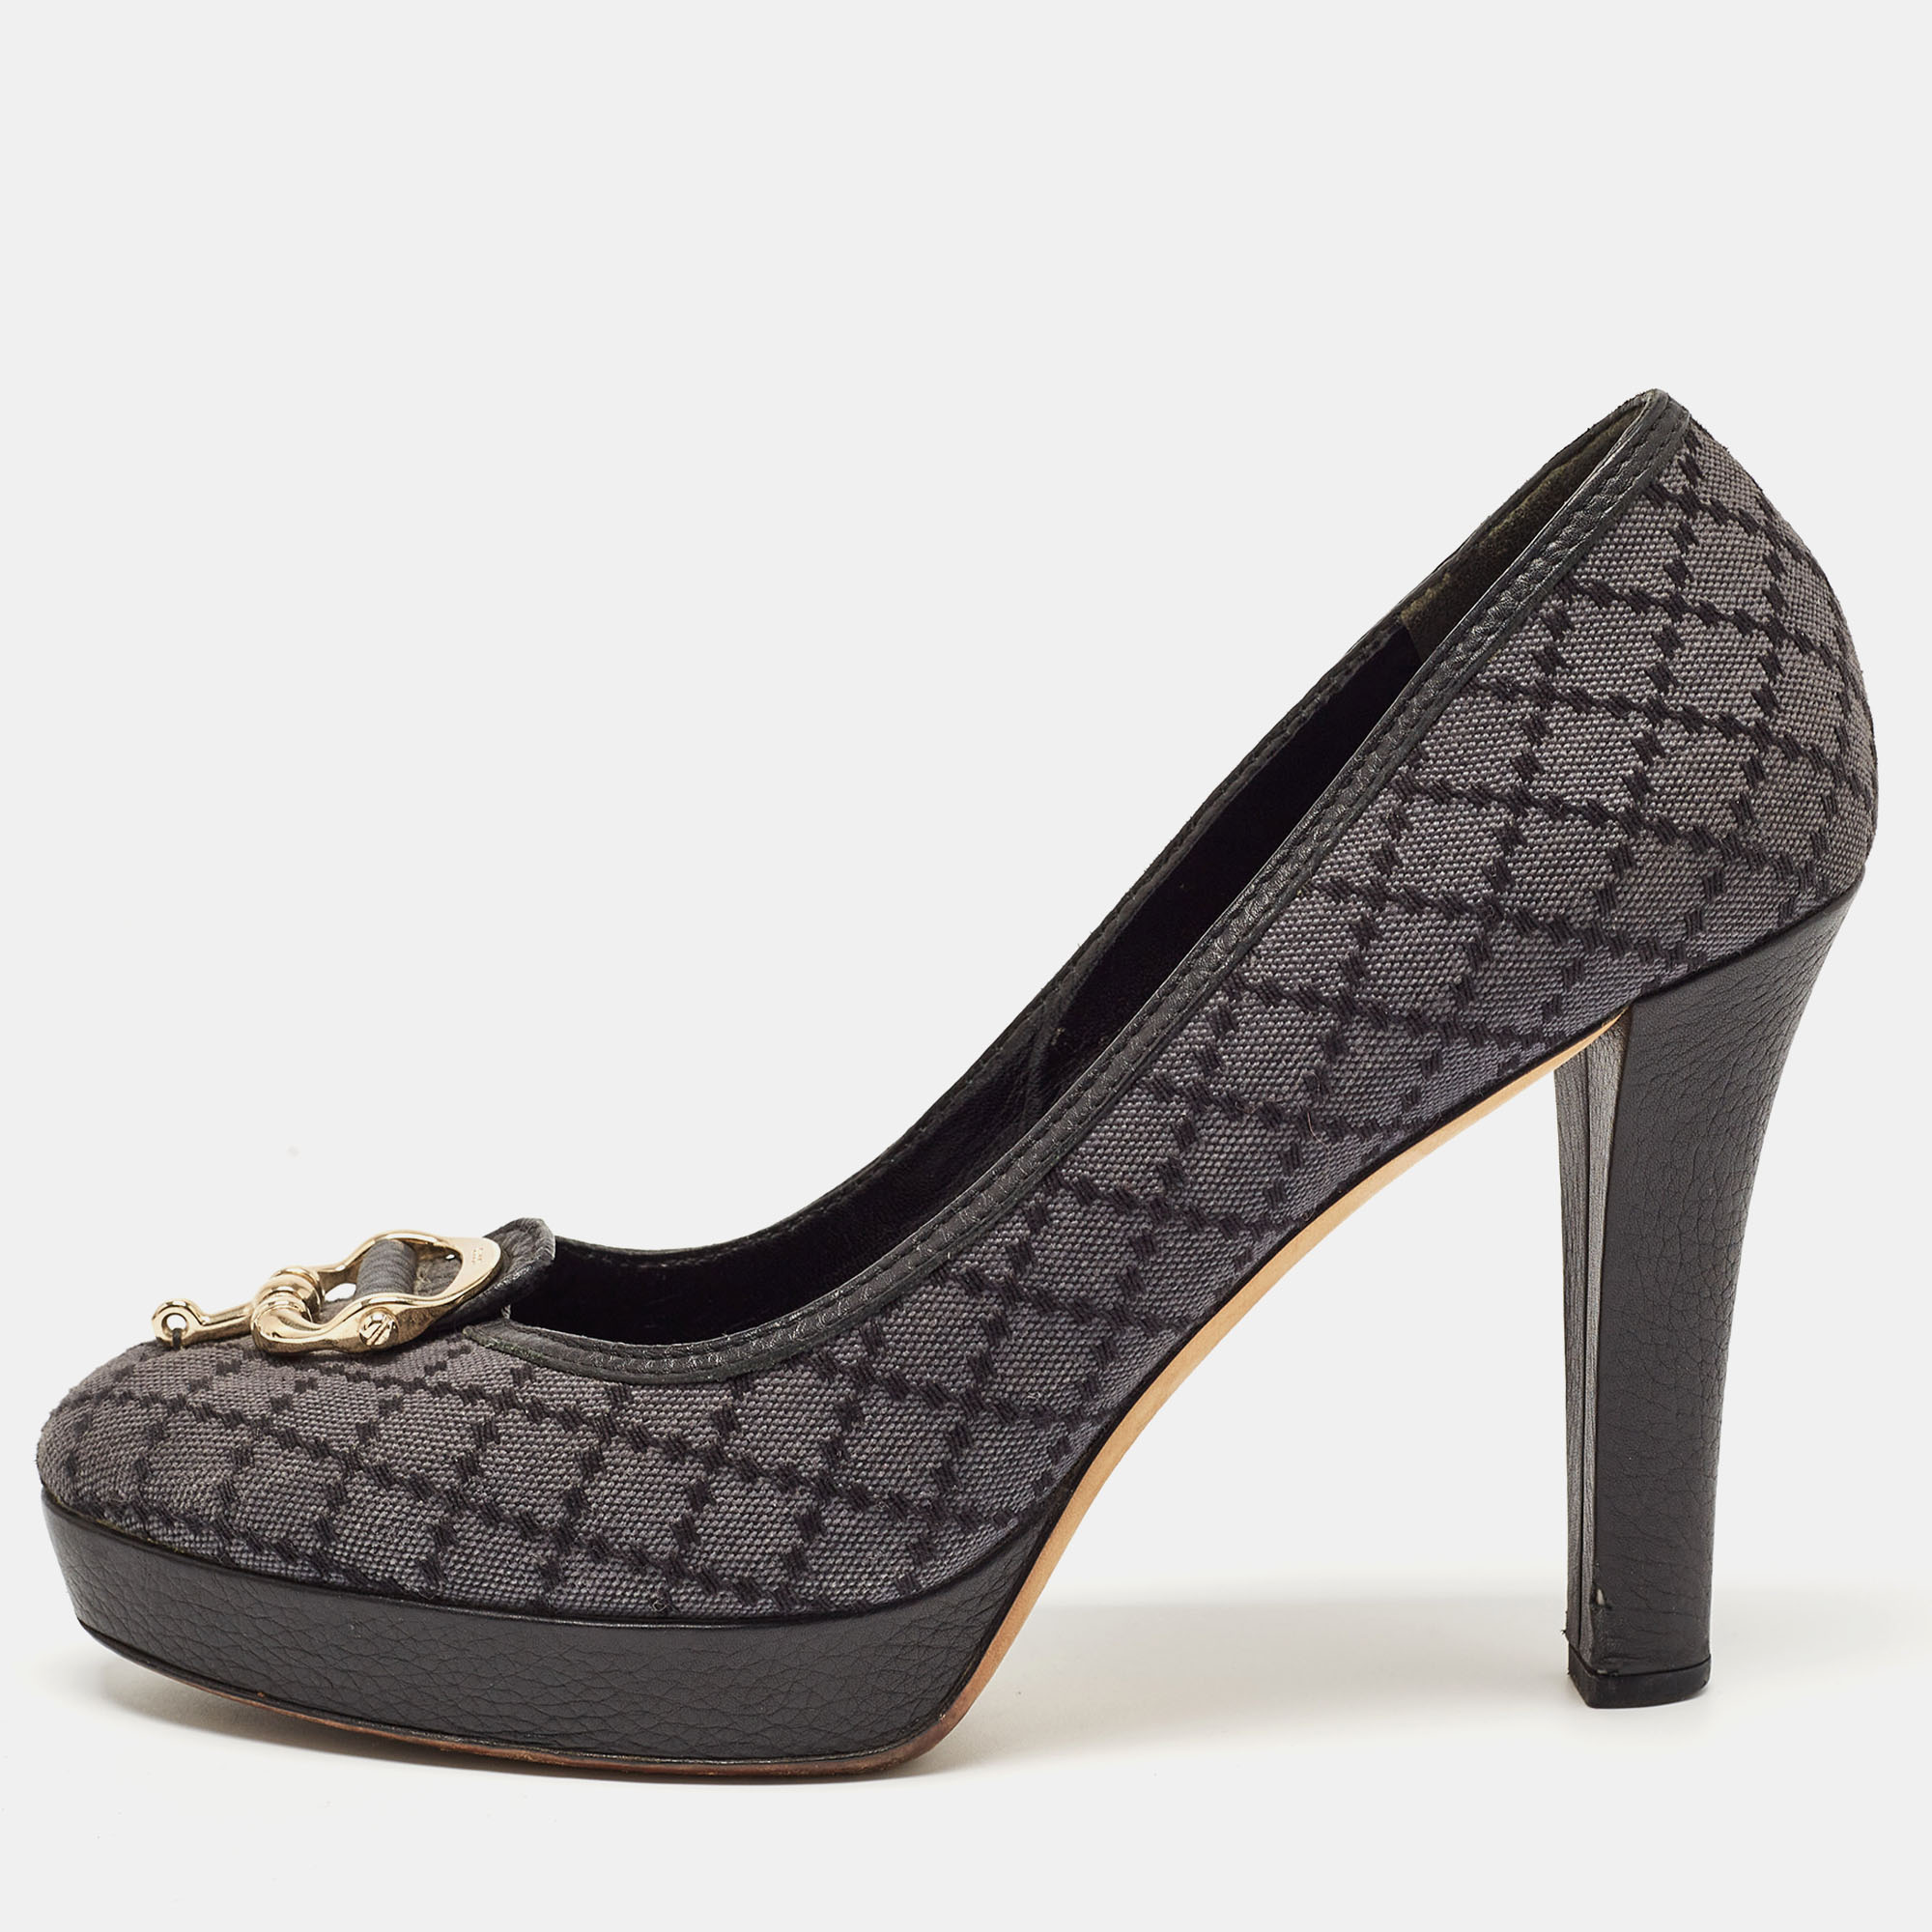 The fashion house's tradition of excellence coupled with modern design sensibilities works to make these Gucci pumps a fabulous choice. Theyll help you deliver a chic look with ease.